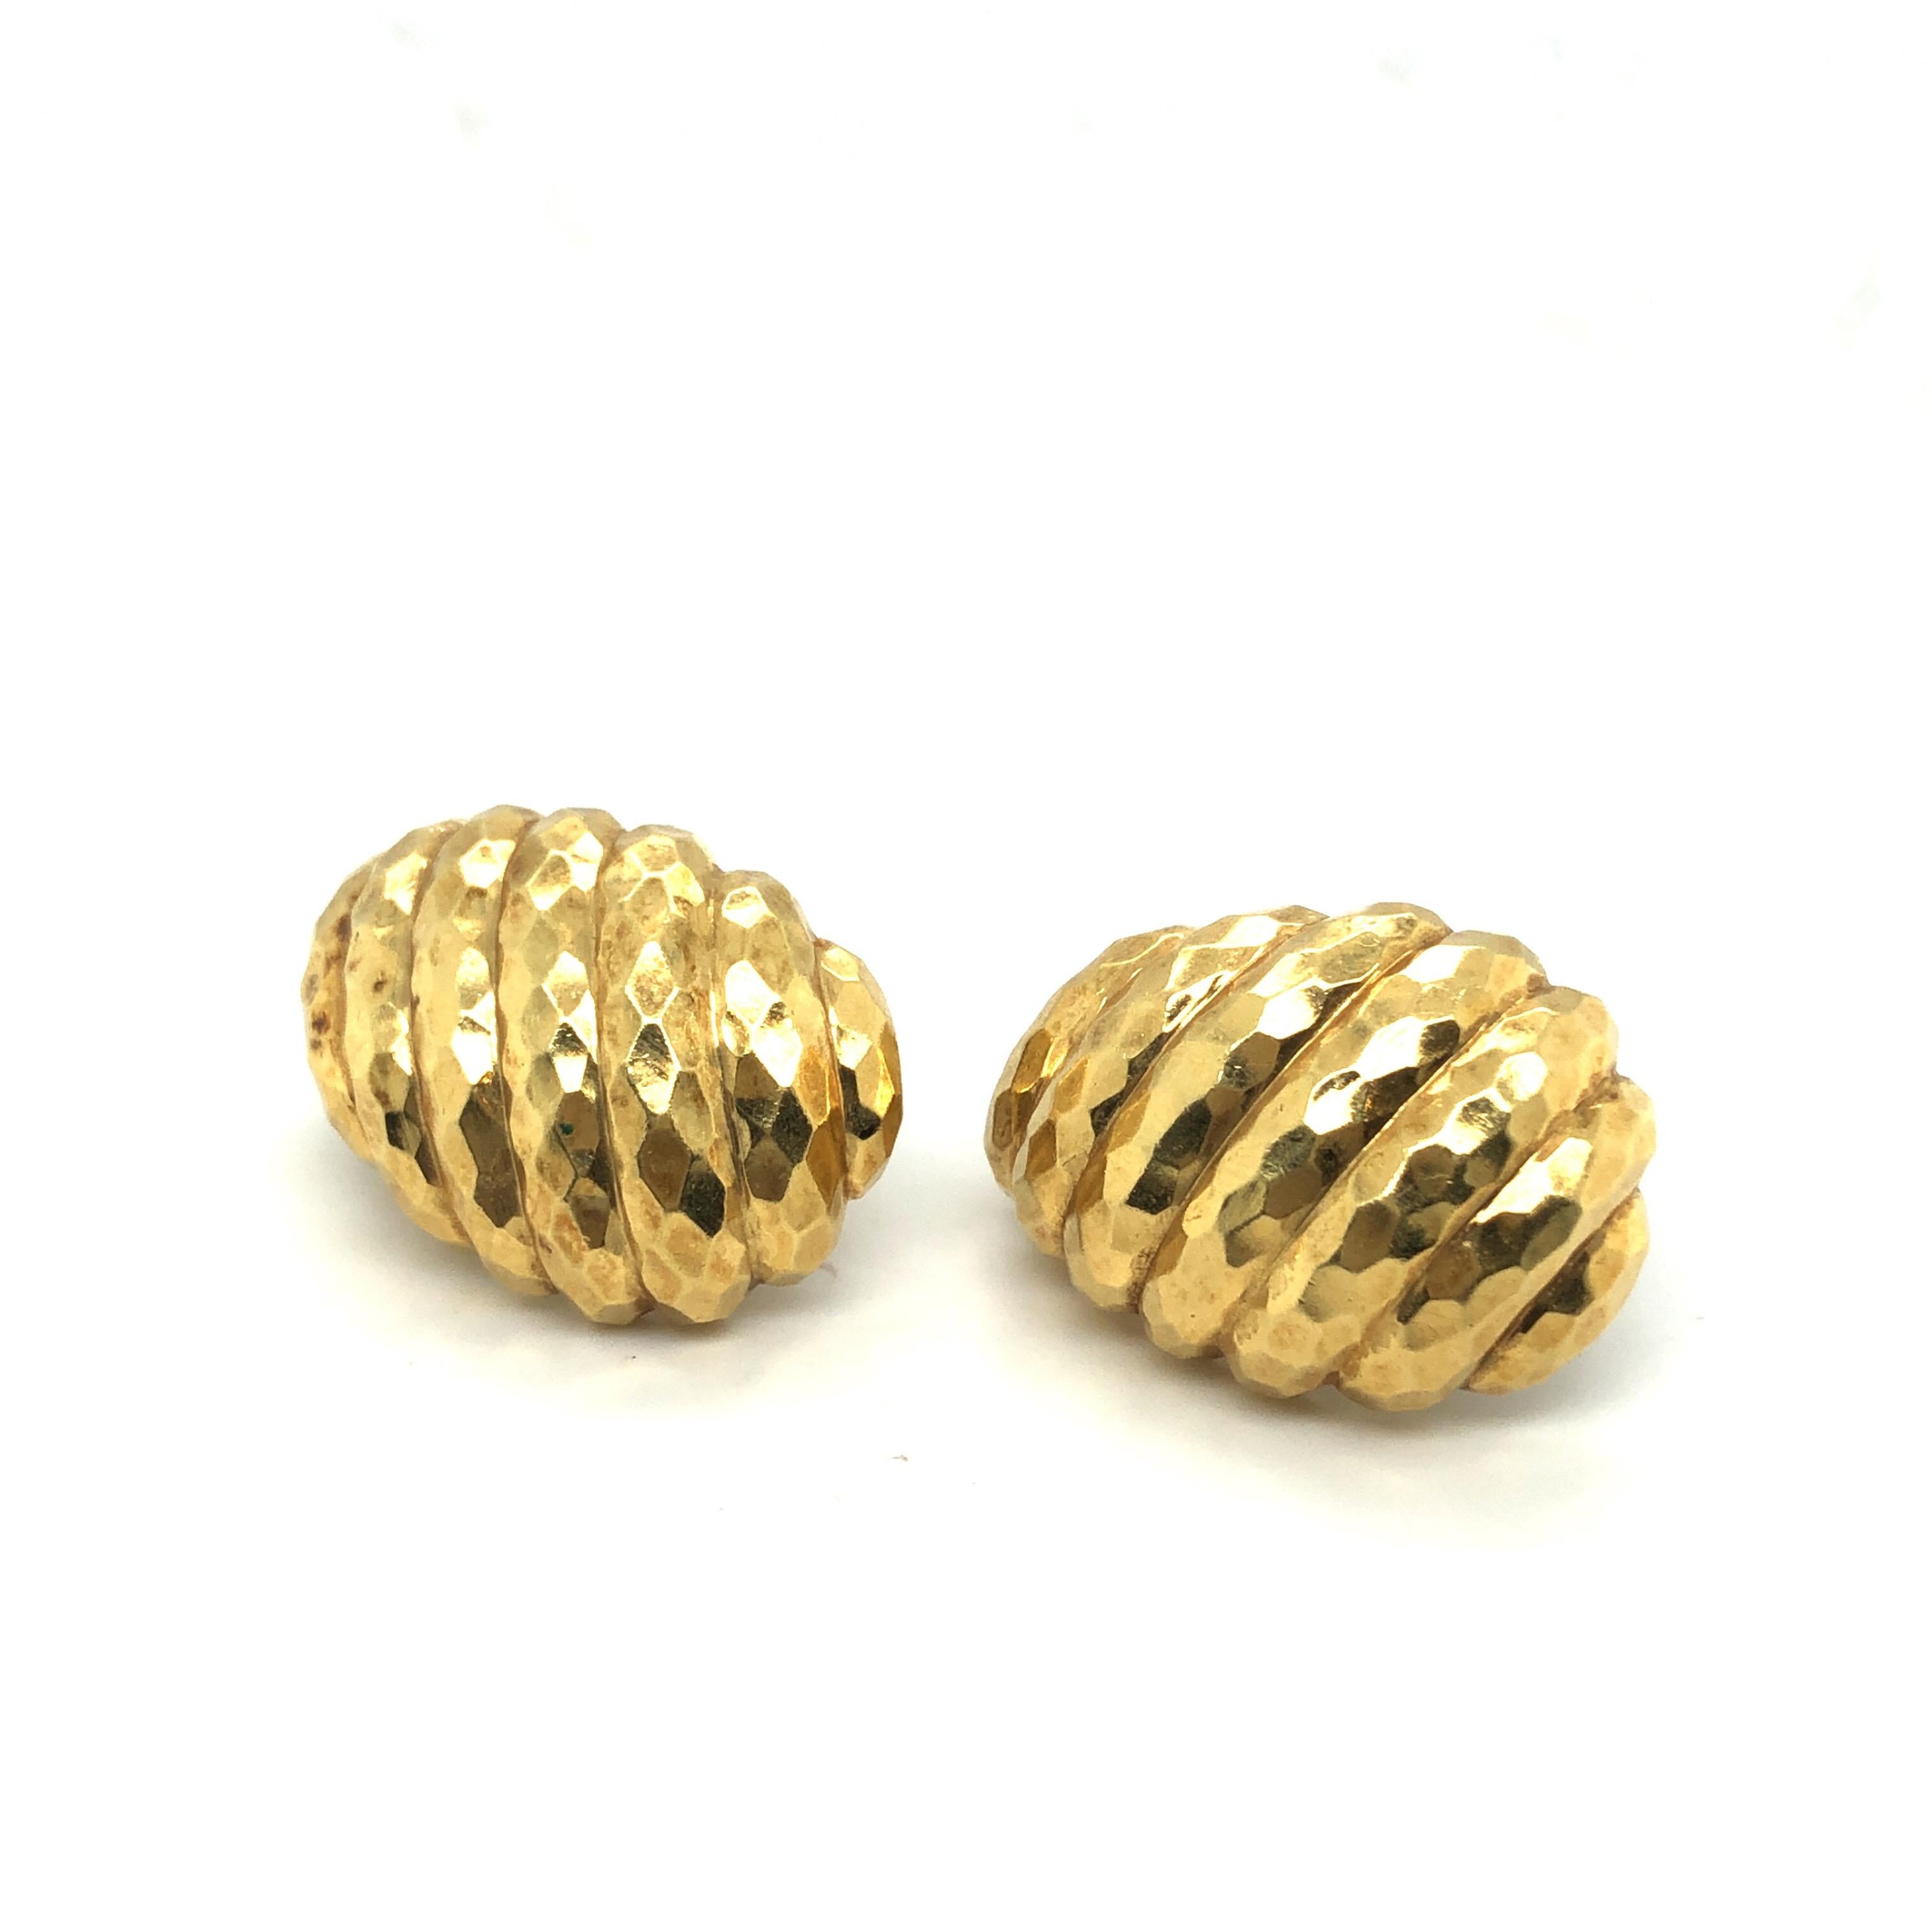 Stylish pair of 18 karat yellow gold hammered finish clip-on earrings by David Webb, New York.
Crafted in 18 karat yellow gold and designed as reeded and hammered half-hoops, these earrings are fitted with clips suitable for unpierced ears. 
David